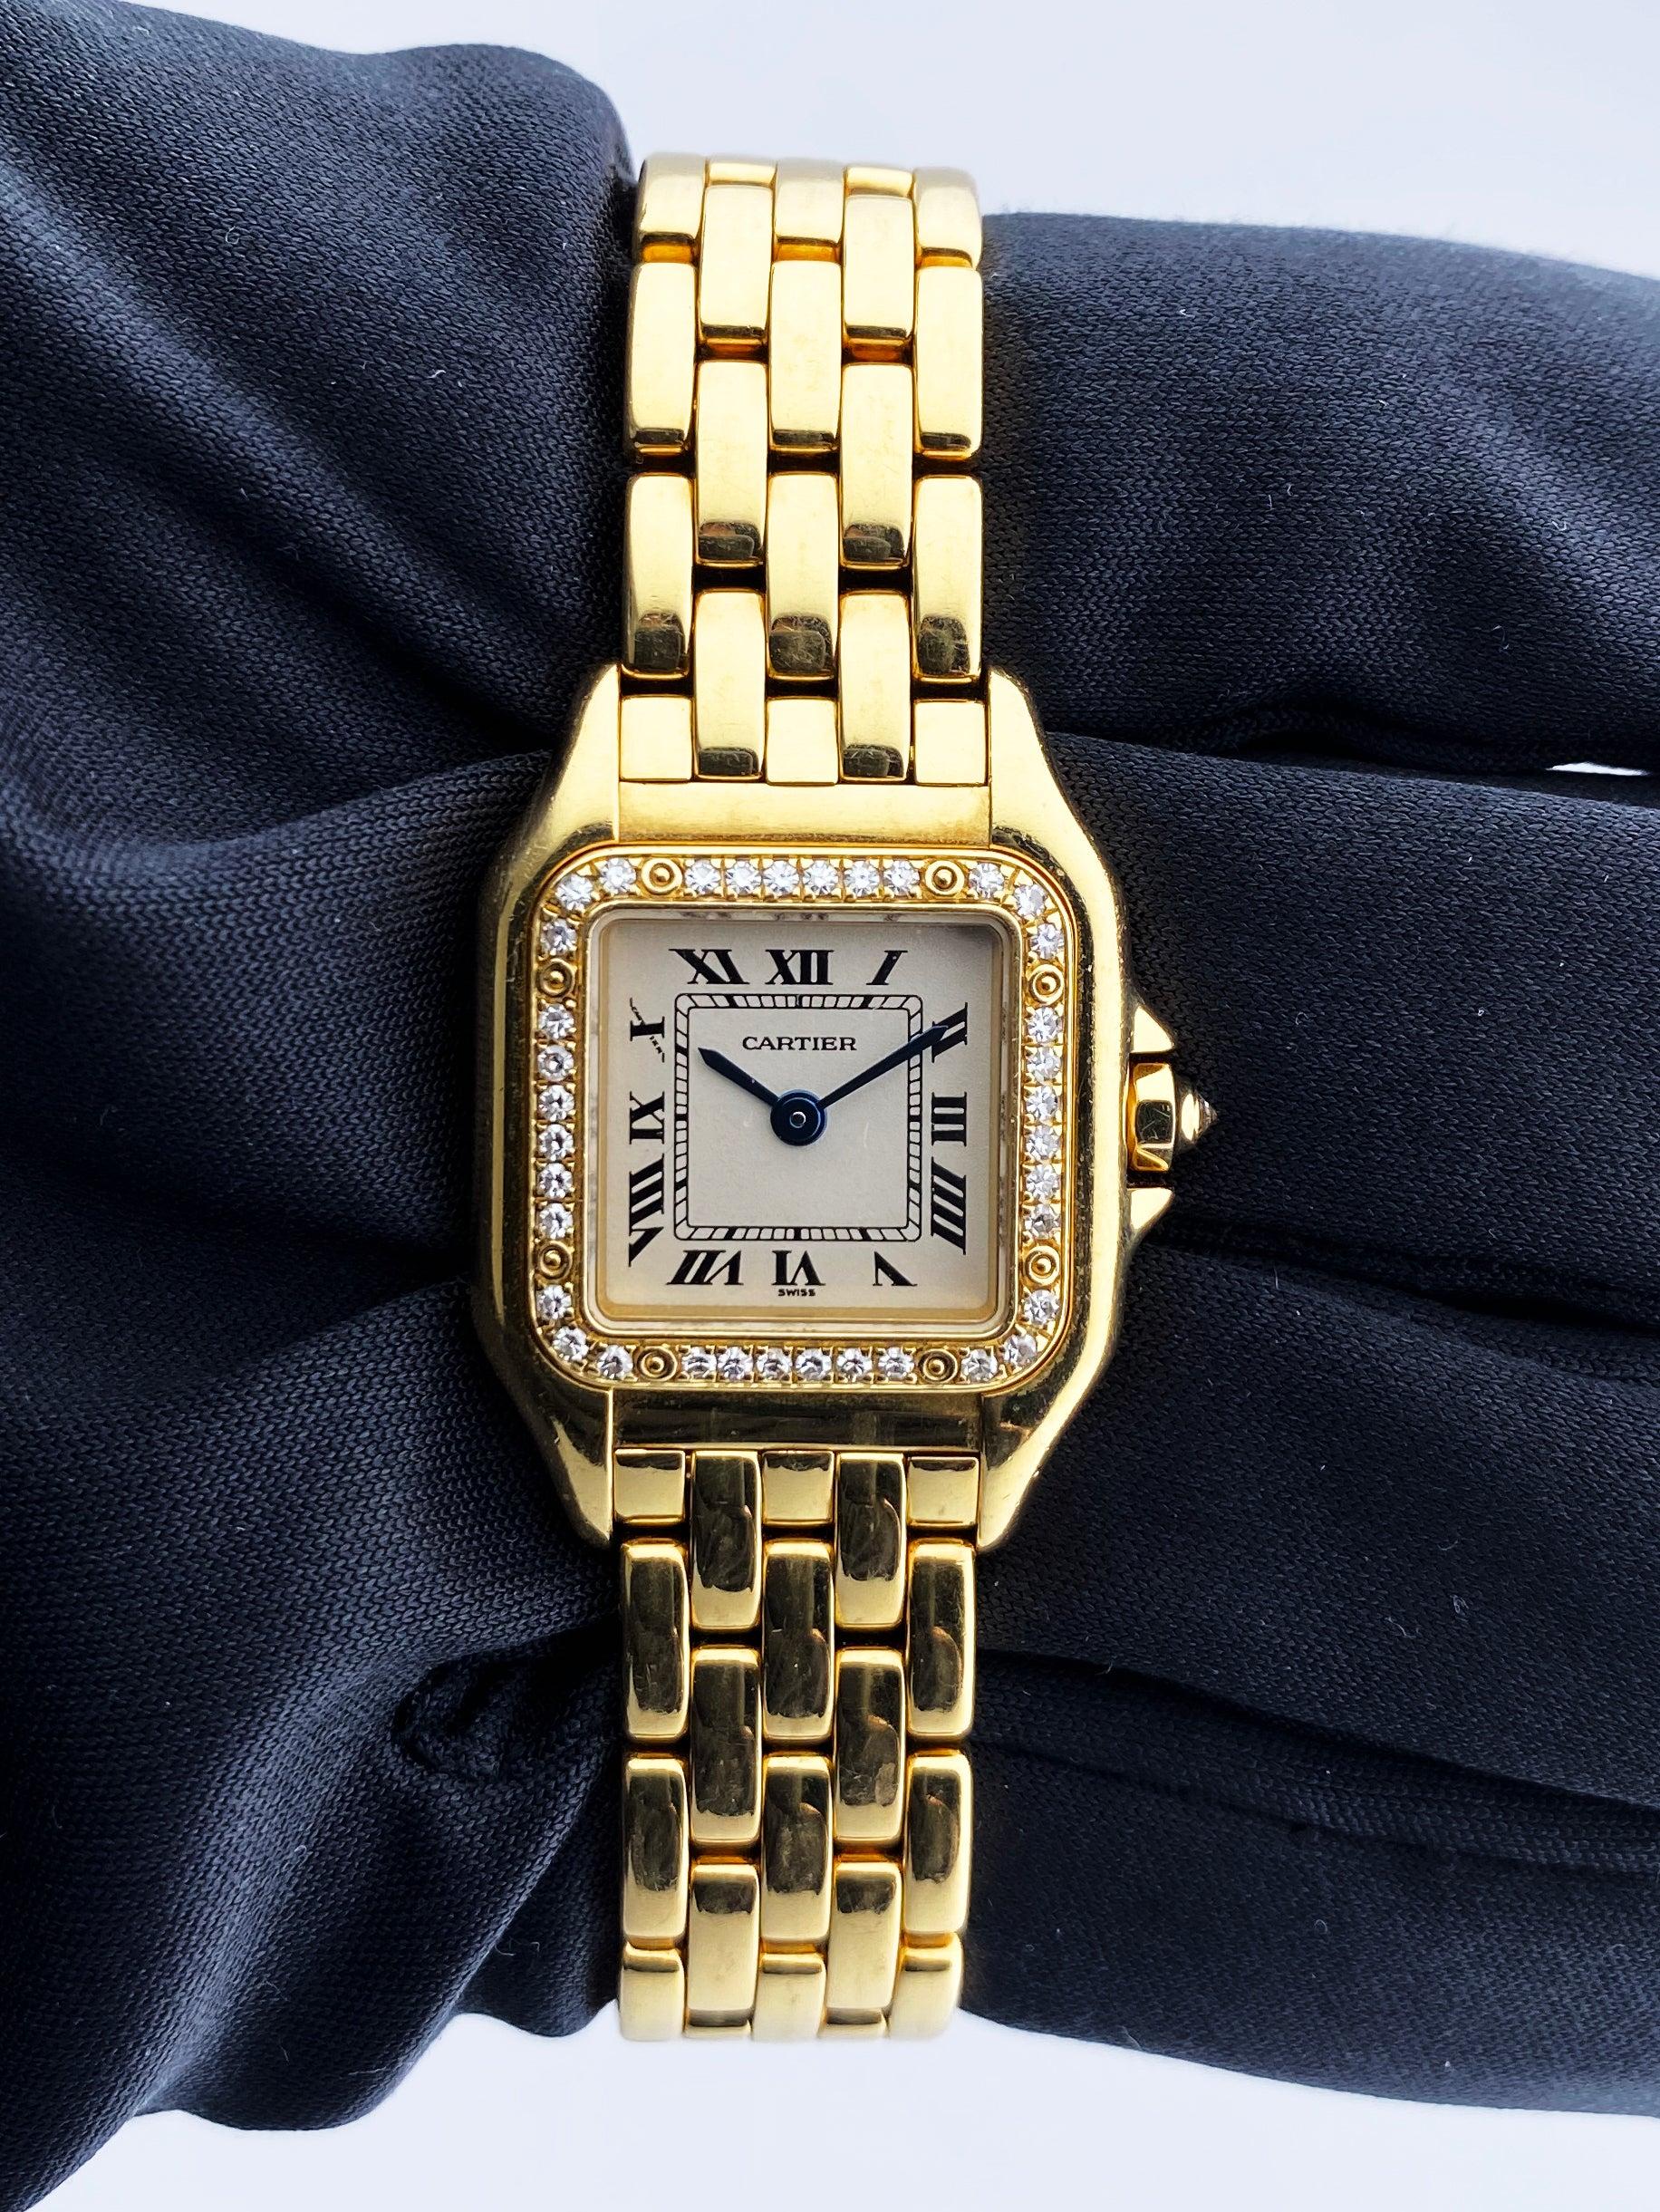 
Cartier Panthere 1280 Ladies Watch. 22mm 18K yellow gold case with original factory diamond set bezel. Off-white dial with blue hands and black Roman numeral hour marker. Minute markers on the inner dial. 18K yellow gold bracelet with hidden